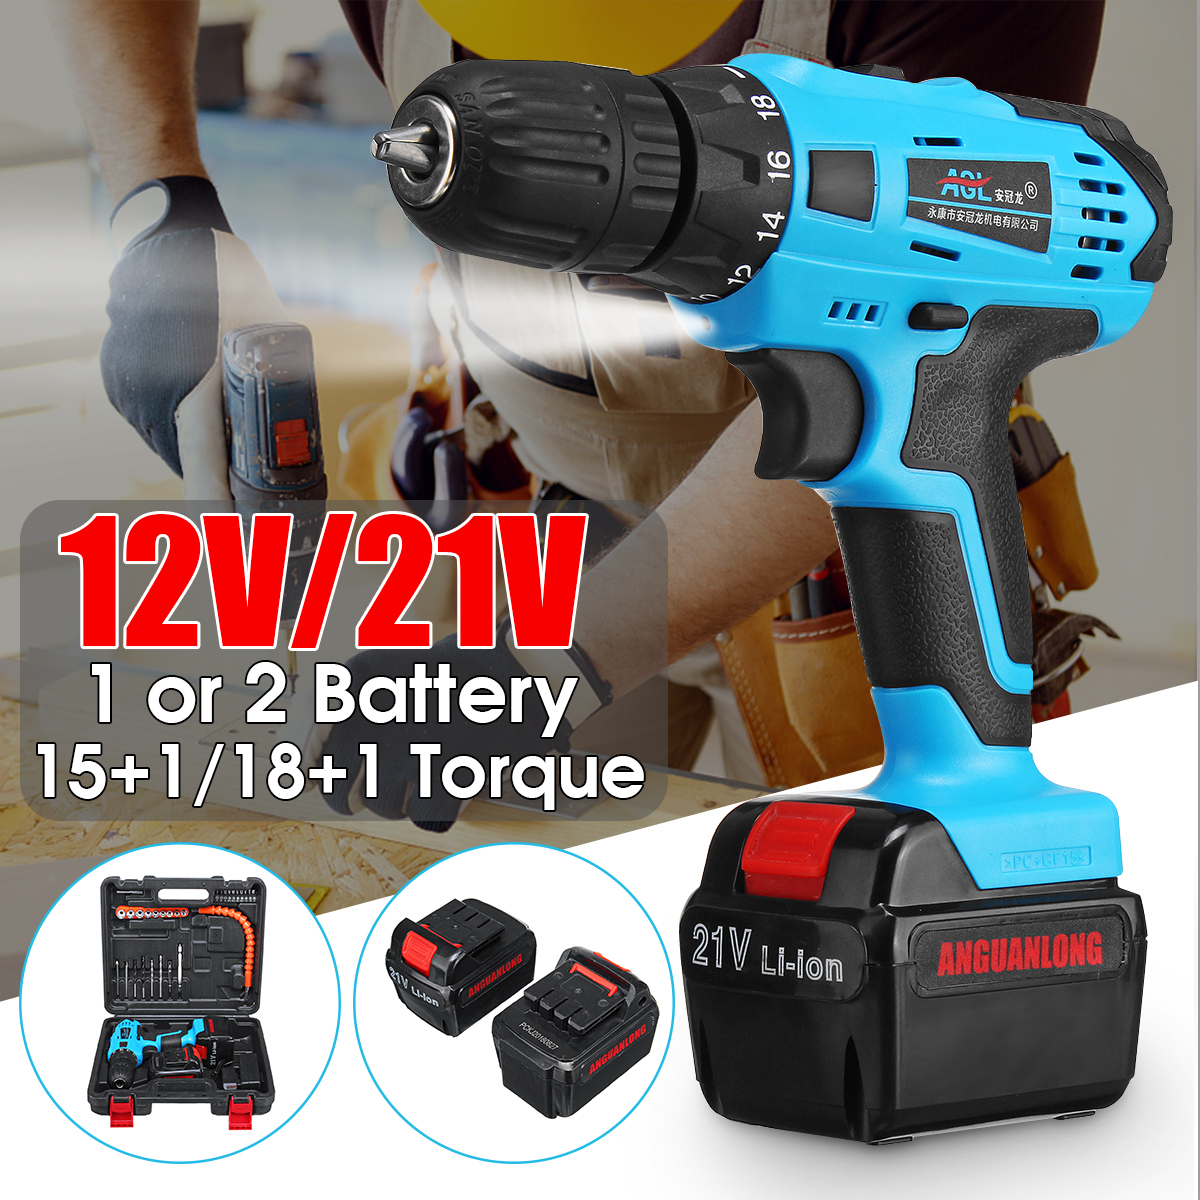 DROW-12V21V-Electric-Cordless-Hand-Drill-Kit-151181-Torque-Household-Electric-Screwdriver-Driver-Too-1430177-2